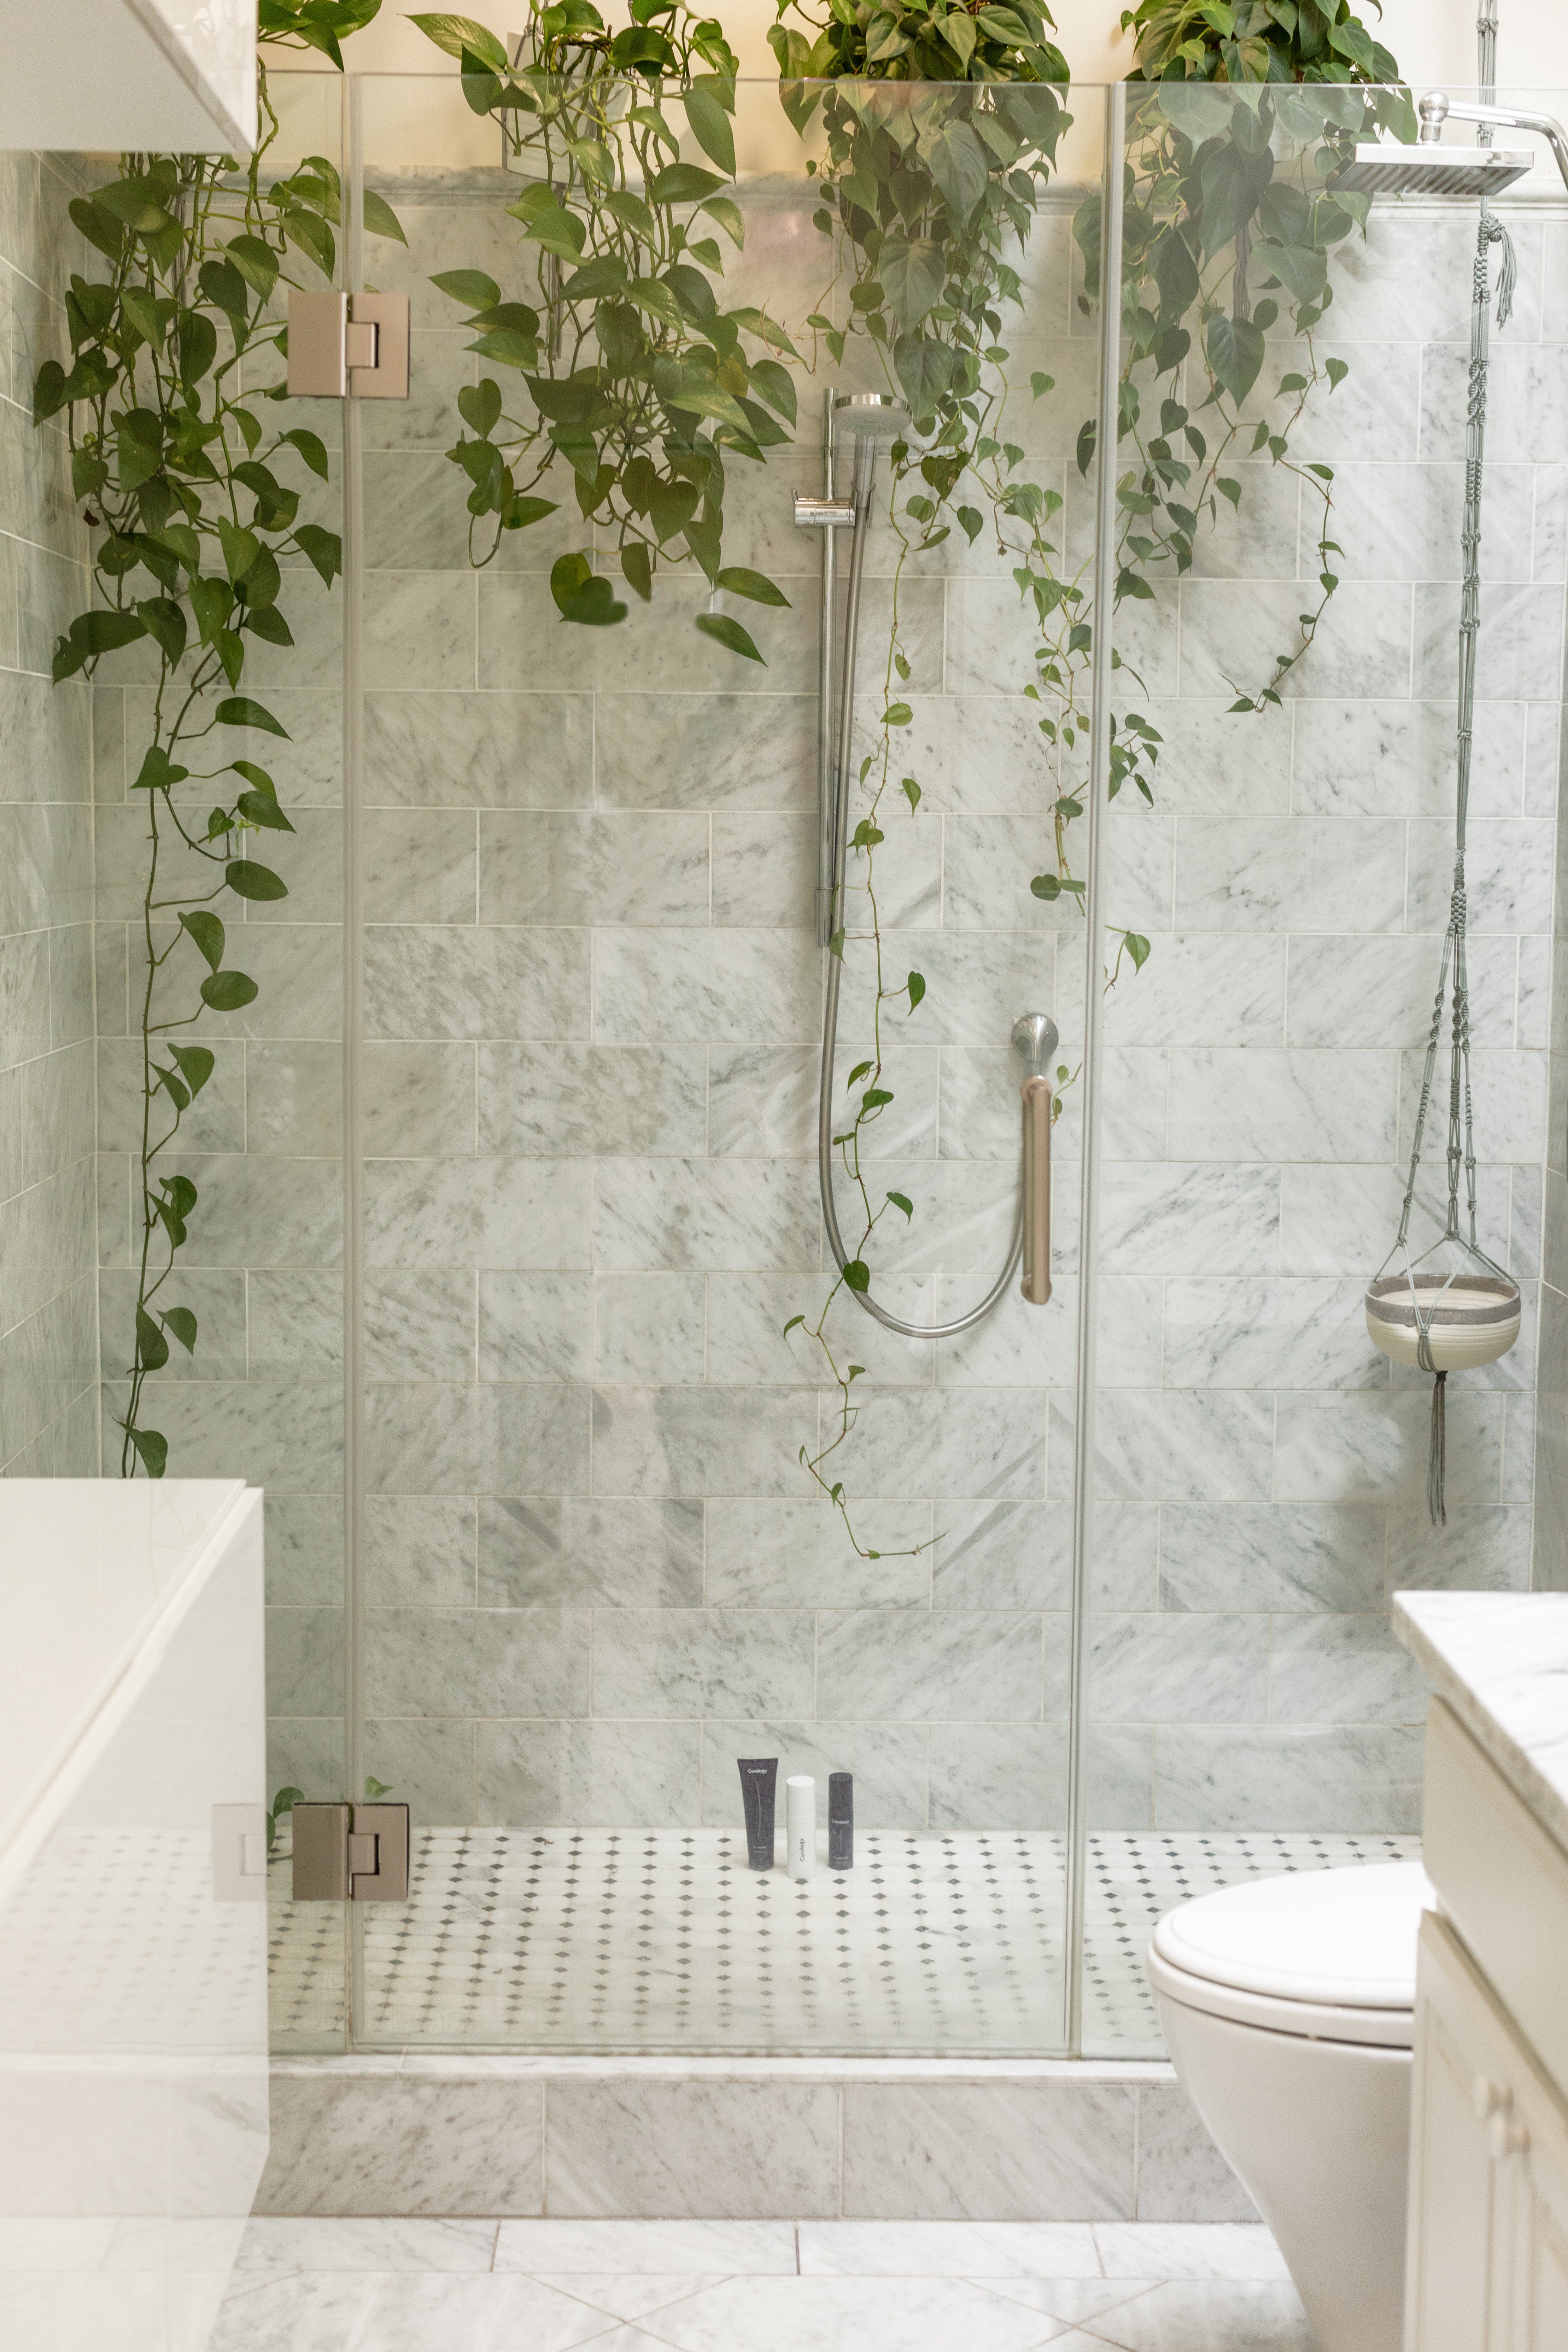 A luxurious bathroom with a big bathtub, tall plant, and a ladder used to display towels